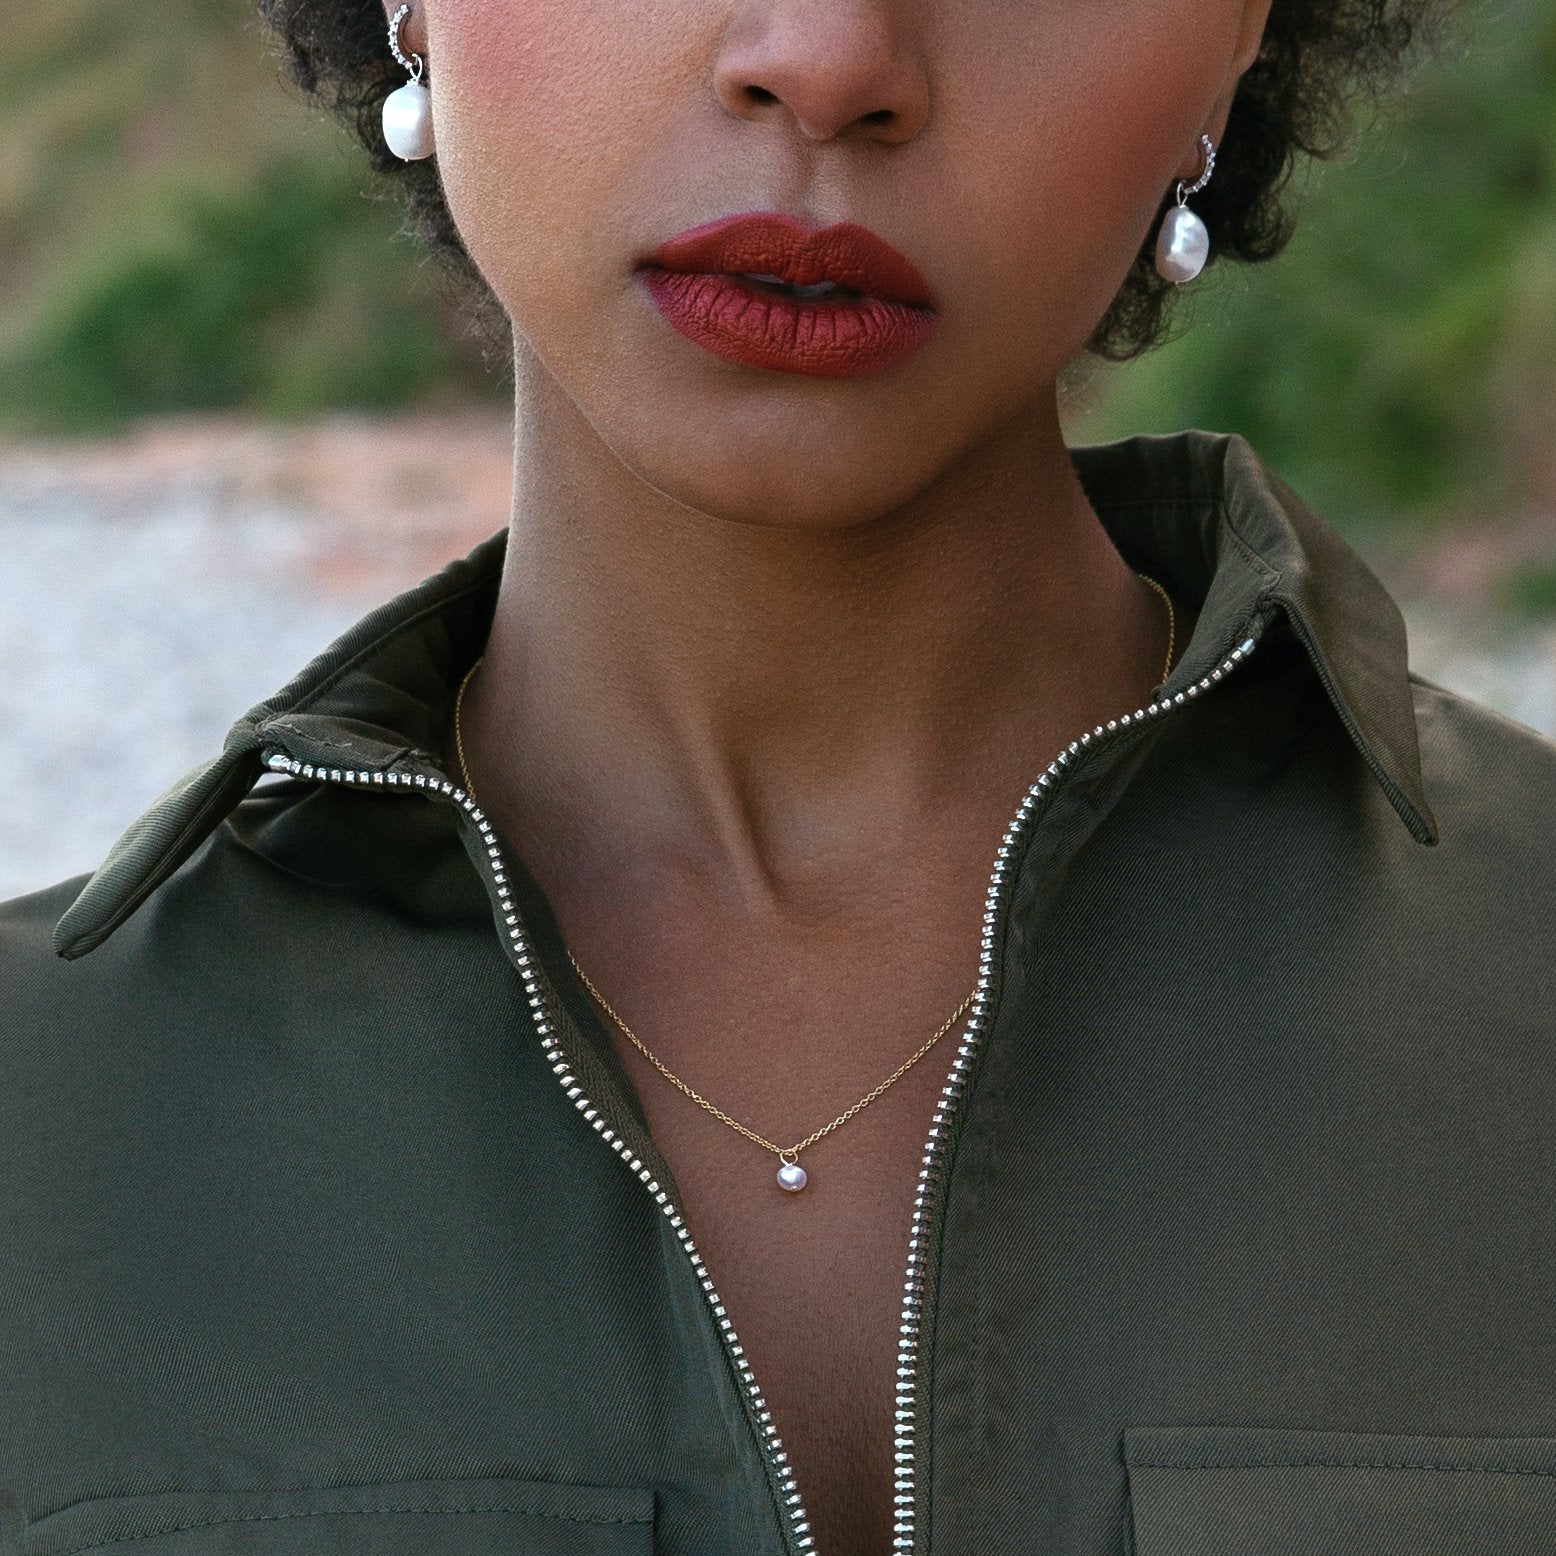 Woman with red lipstick on her lips wearing a gold single pearl necklace around her neck, silver huggie hoop pearl drop earrings in her ears and a army green top with a zip collar